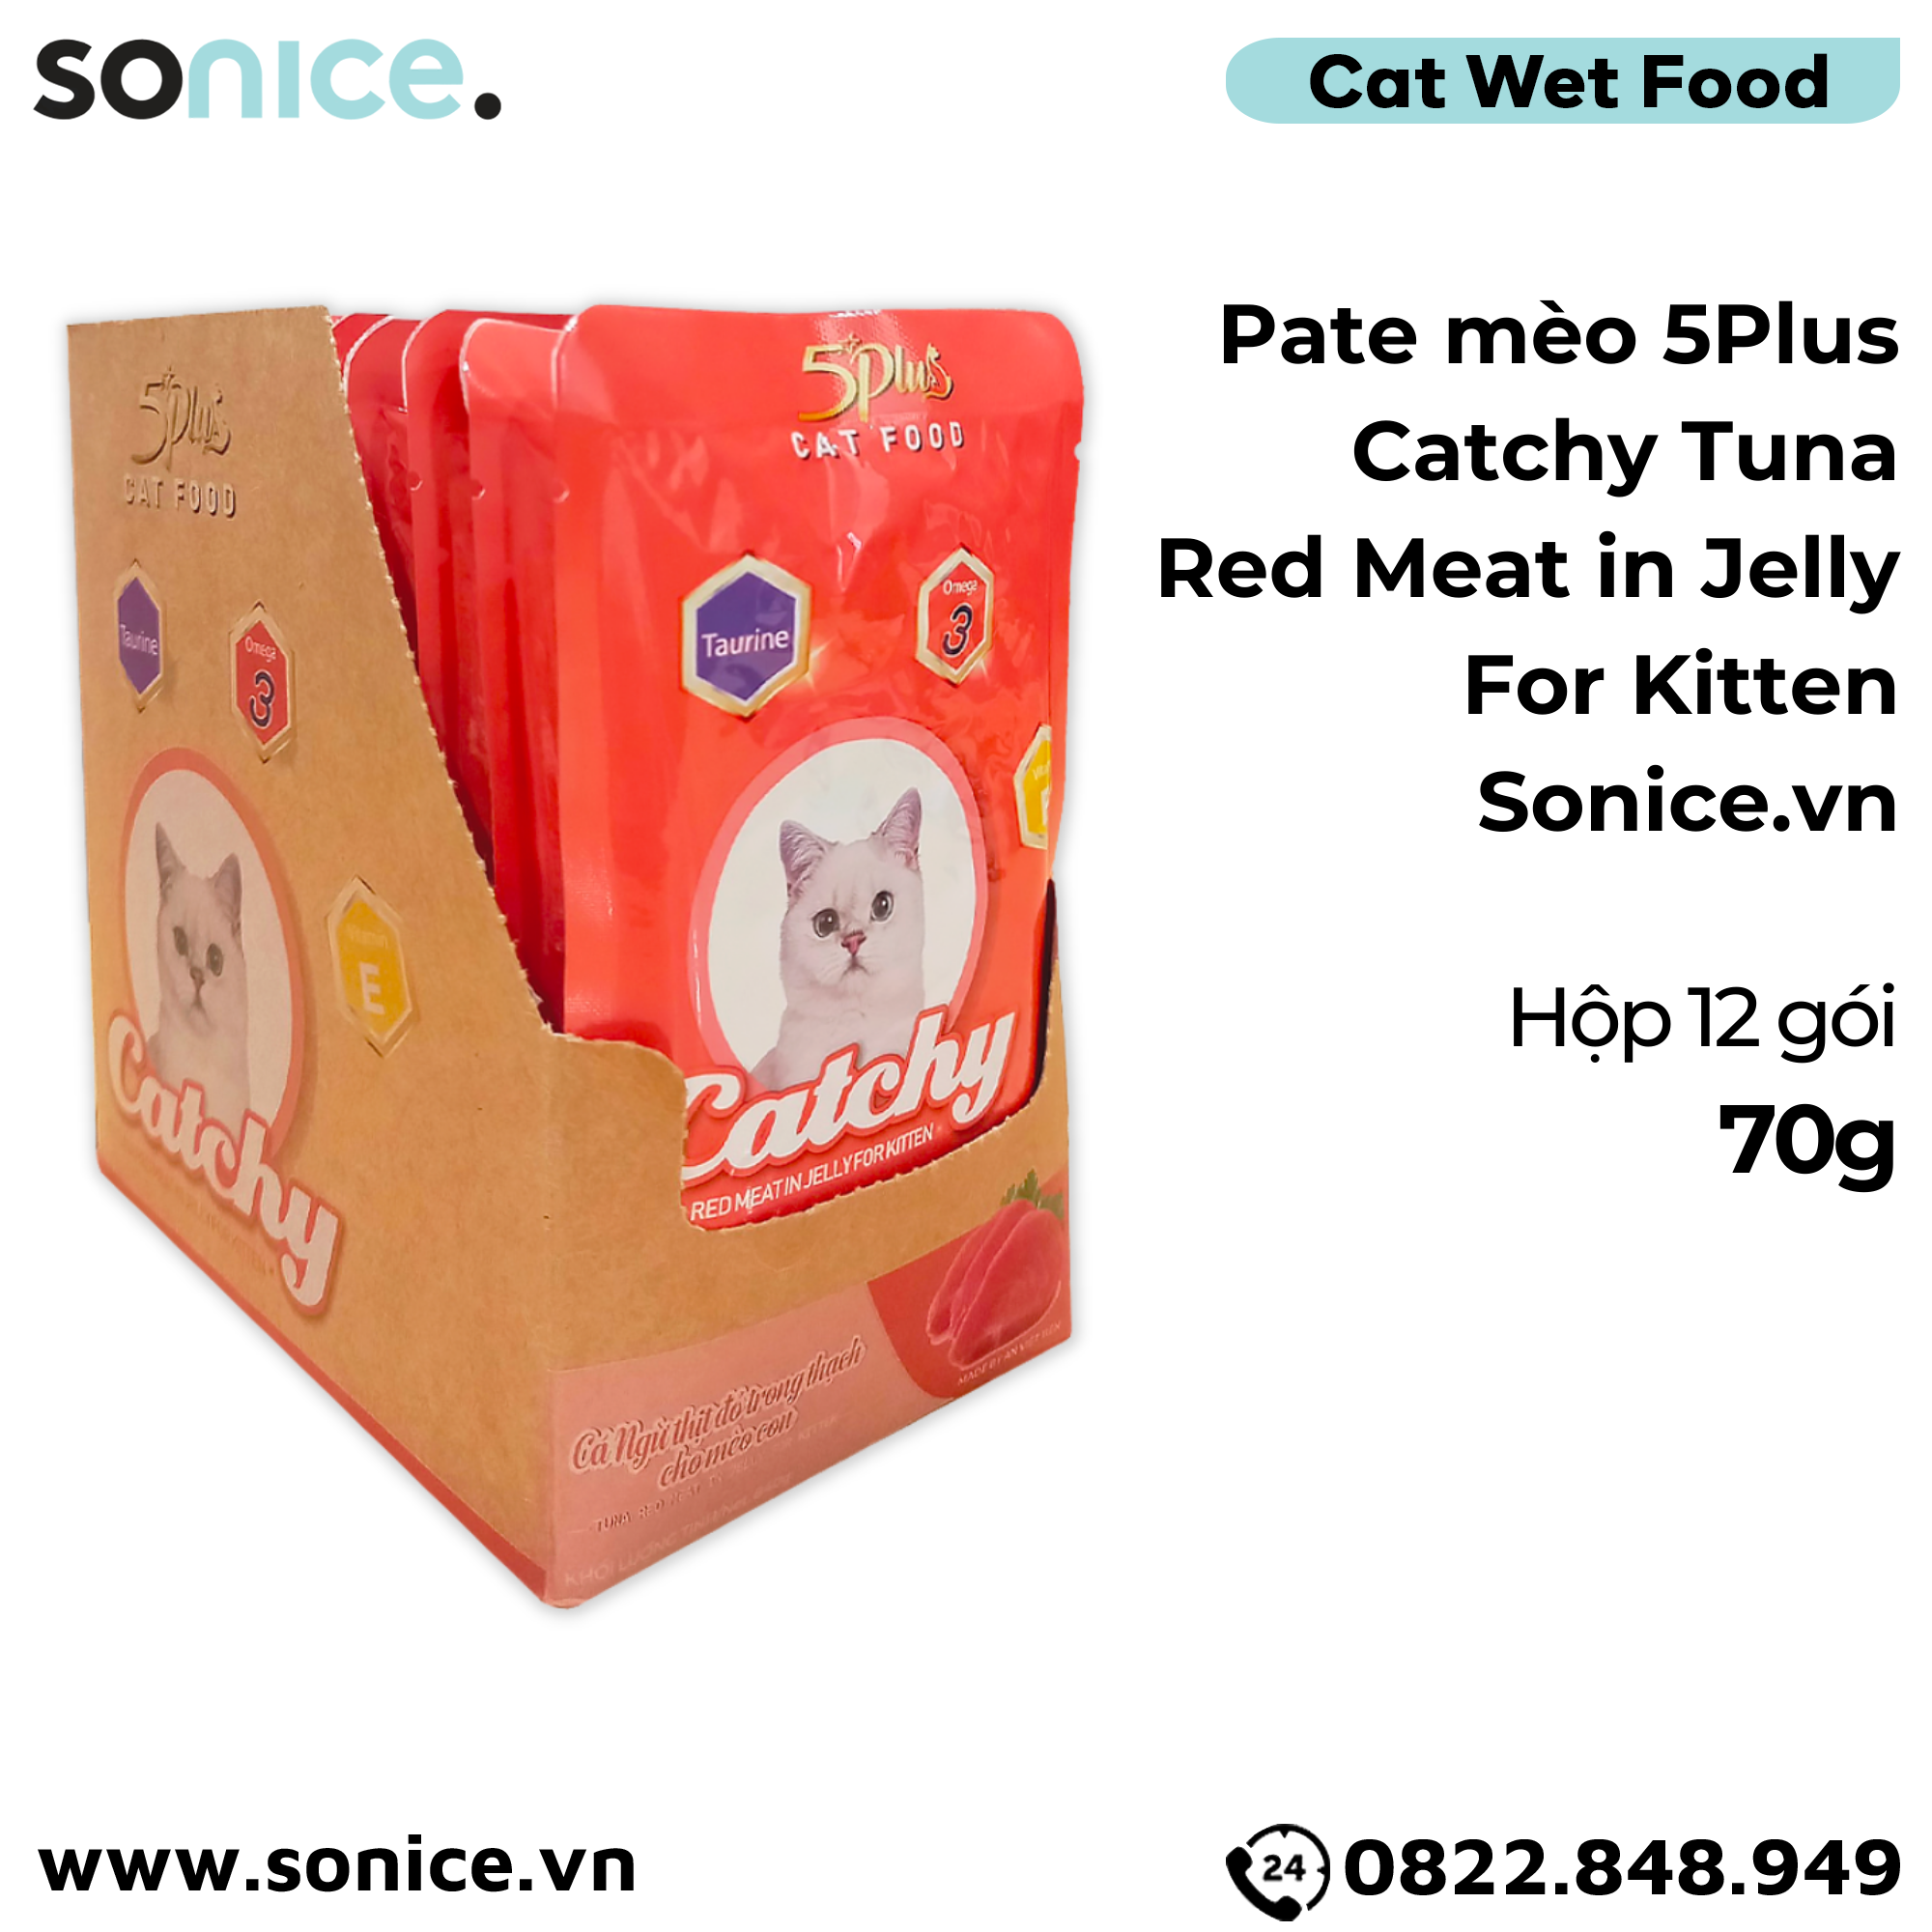  Pate mèo 5Plus Catchy Tuna Red Meat in Jelly for Kitten 70g - Hộp 12 gói SONICE. 